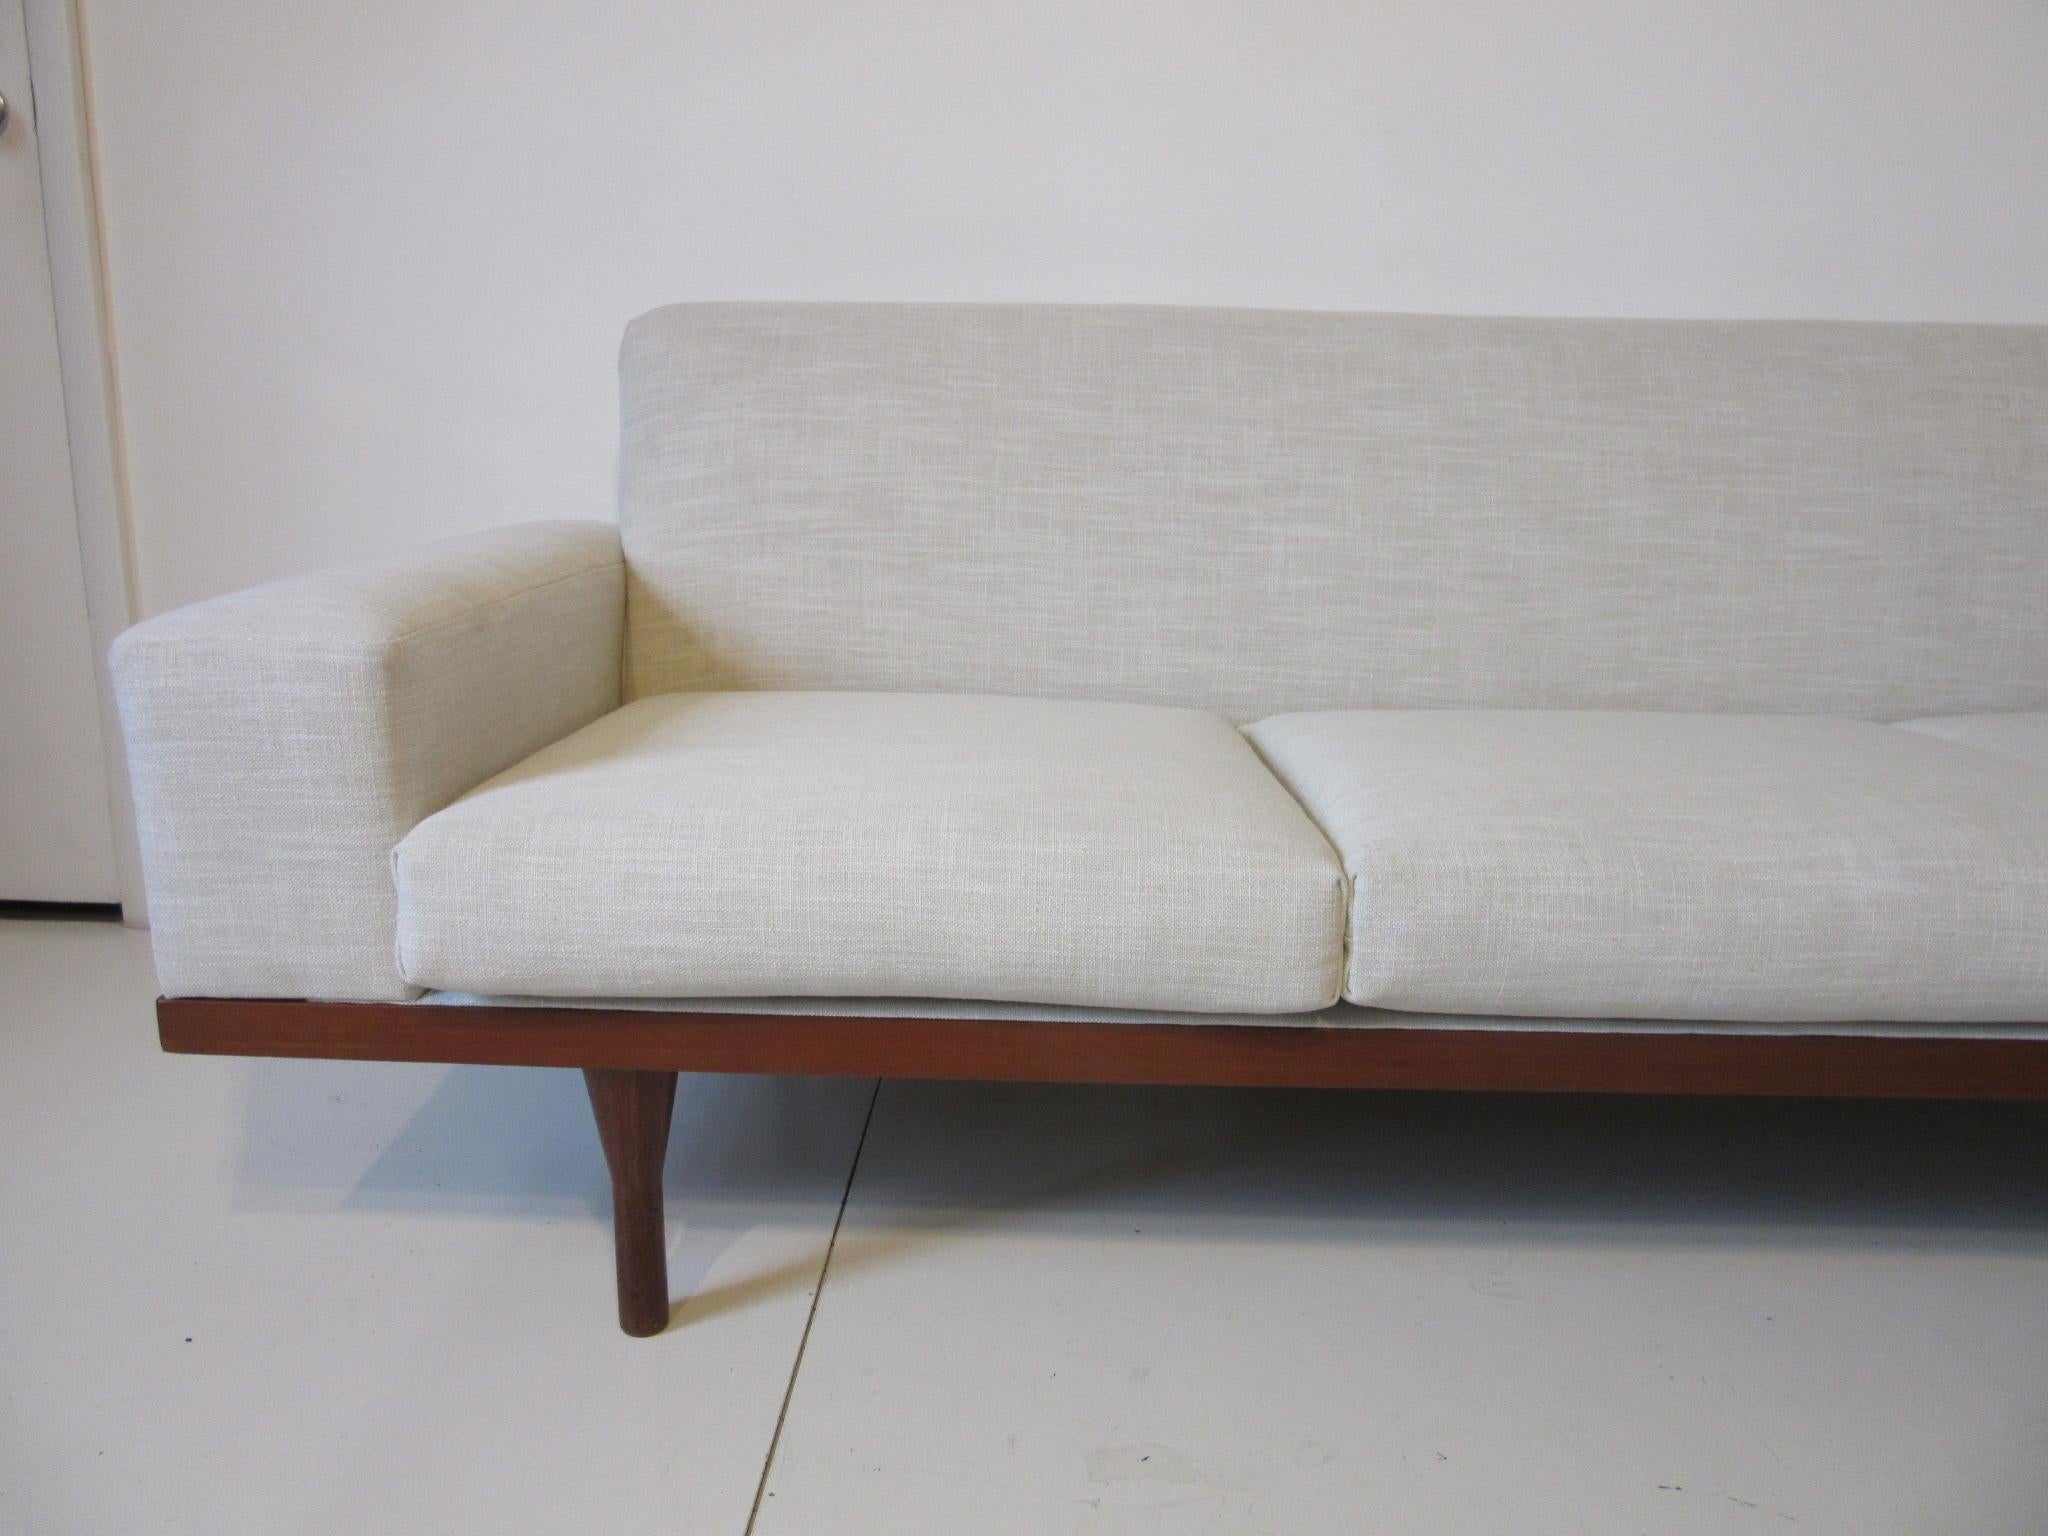 An upholstered sofa or loveseat with three lose bottom cushions all refinished in a woven creamy white and beige fabric. The solid teak frame has removable solid teak legs and is well constructed by early Danish crafts persons in 1962. Made in